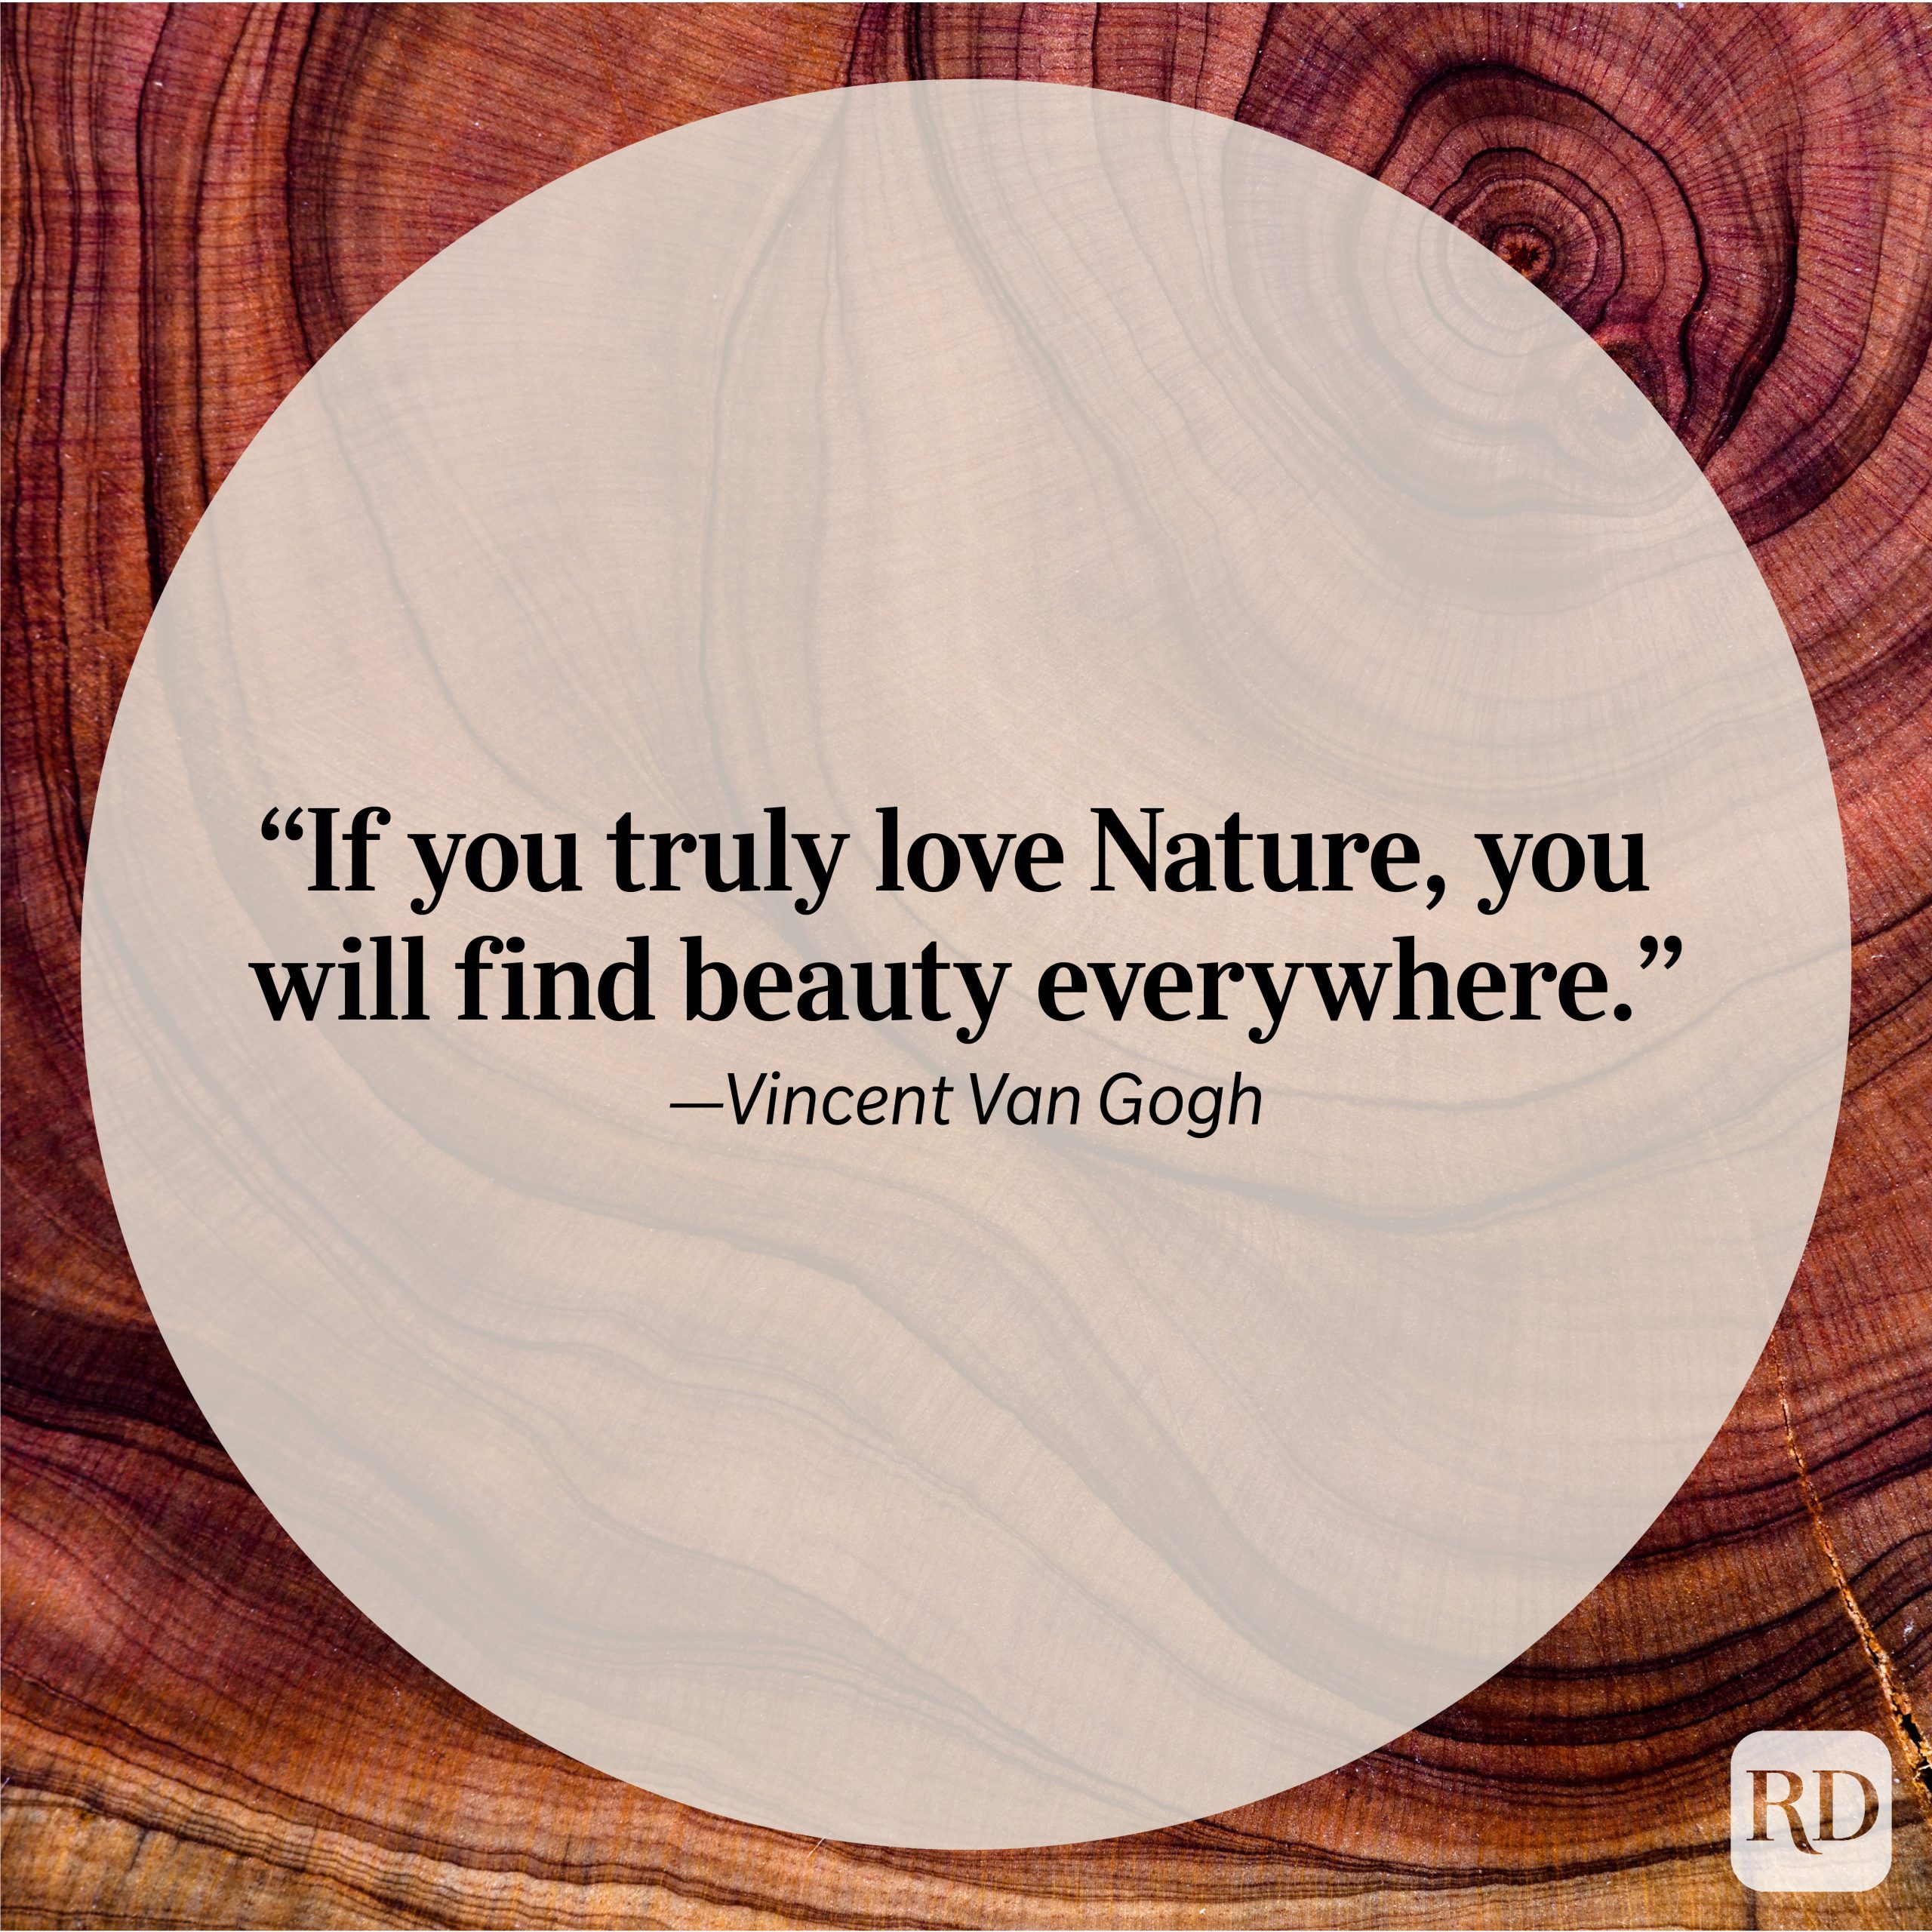 63 Nature Quotes That Will Remind You of Earth's Beauty